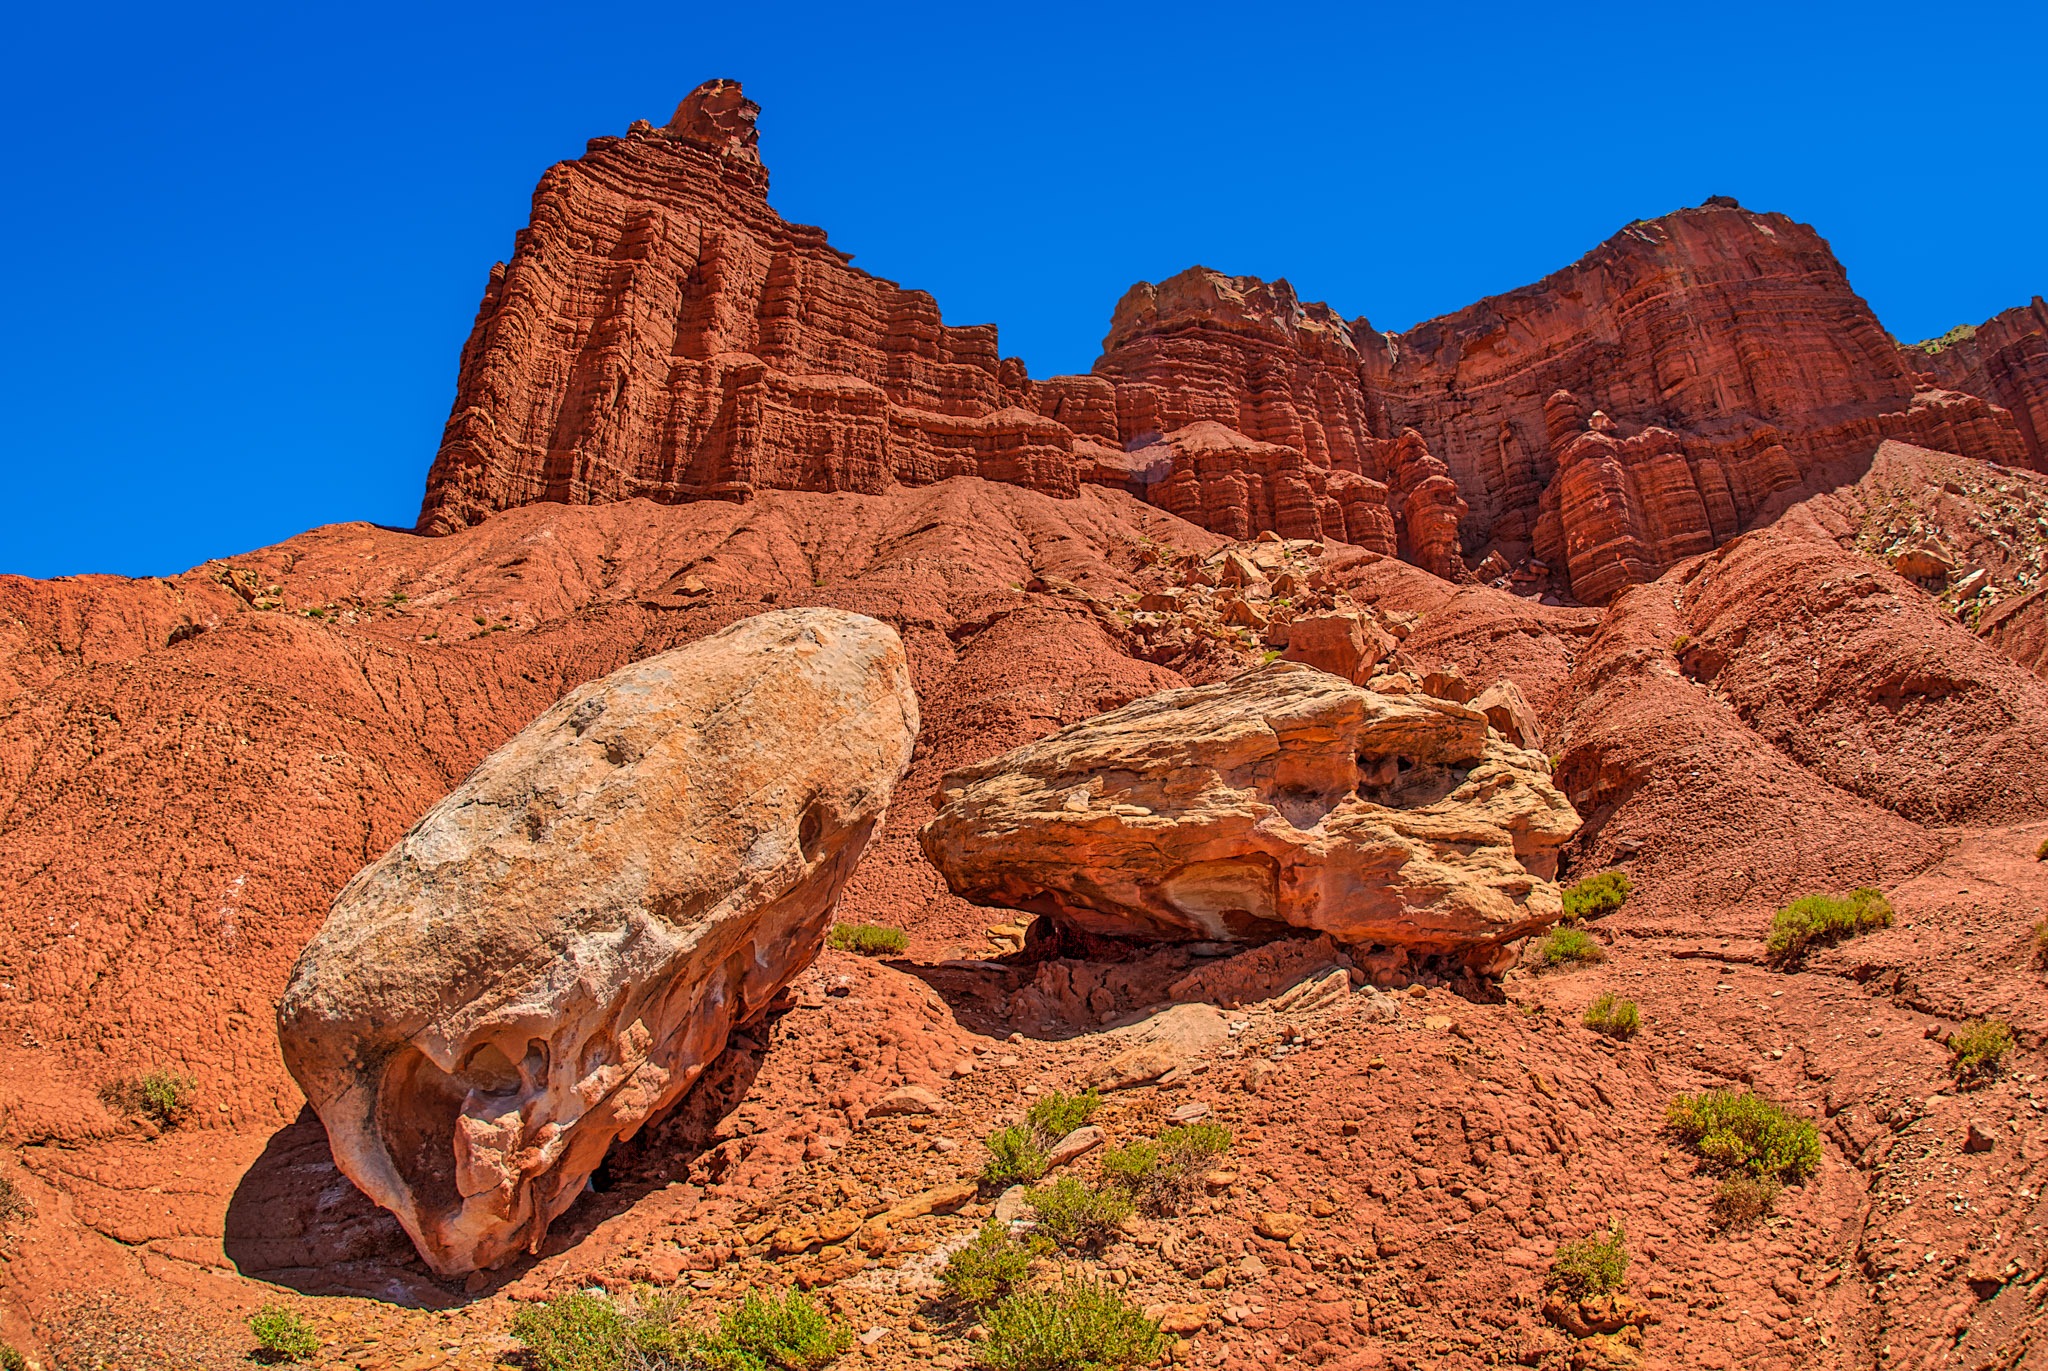 This is a view up at Chimney Rock from Utah State Route 24 in Capitol Reef National Park in Utah. The feature is eroded from the Moenkopi Formation and is capped with the Shinarump Member of the Moenkopi Formation.